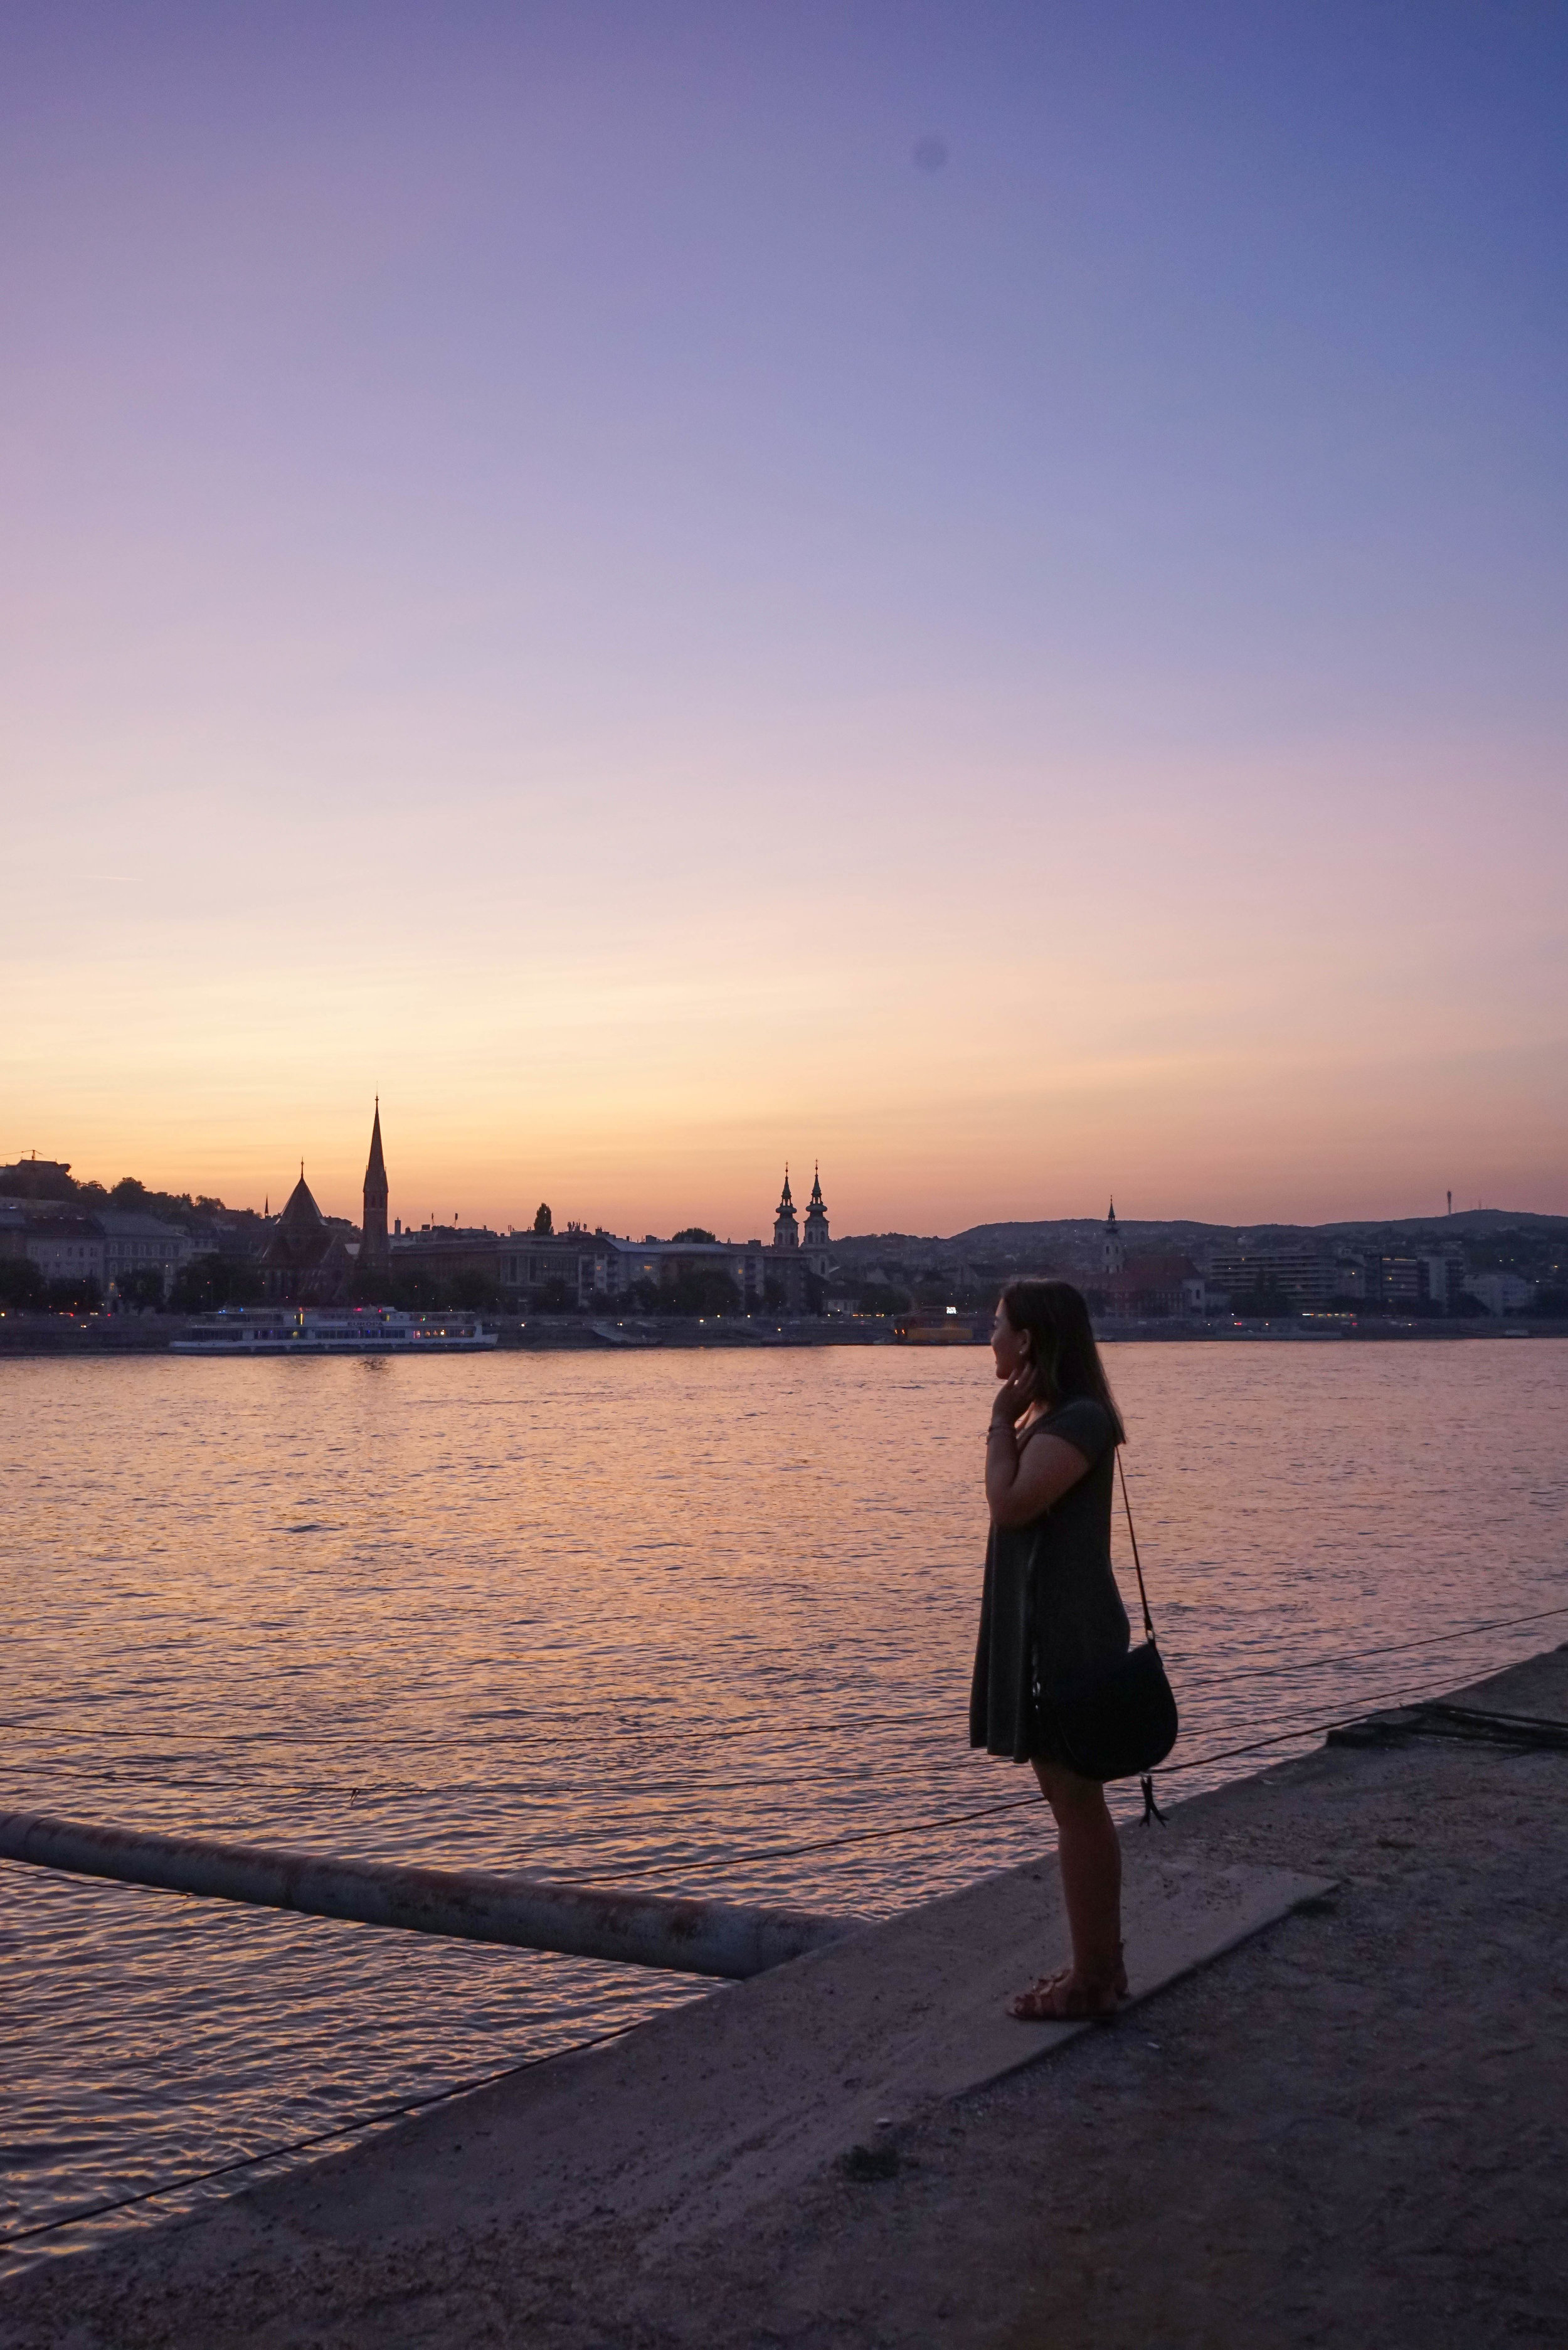 Sunset on the Danube | Top 7 Things to do in Budapest